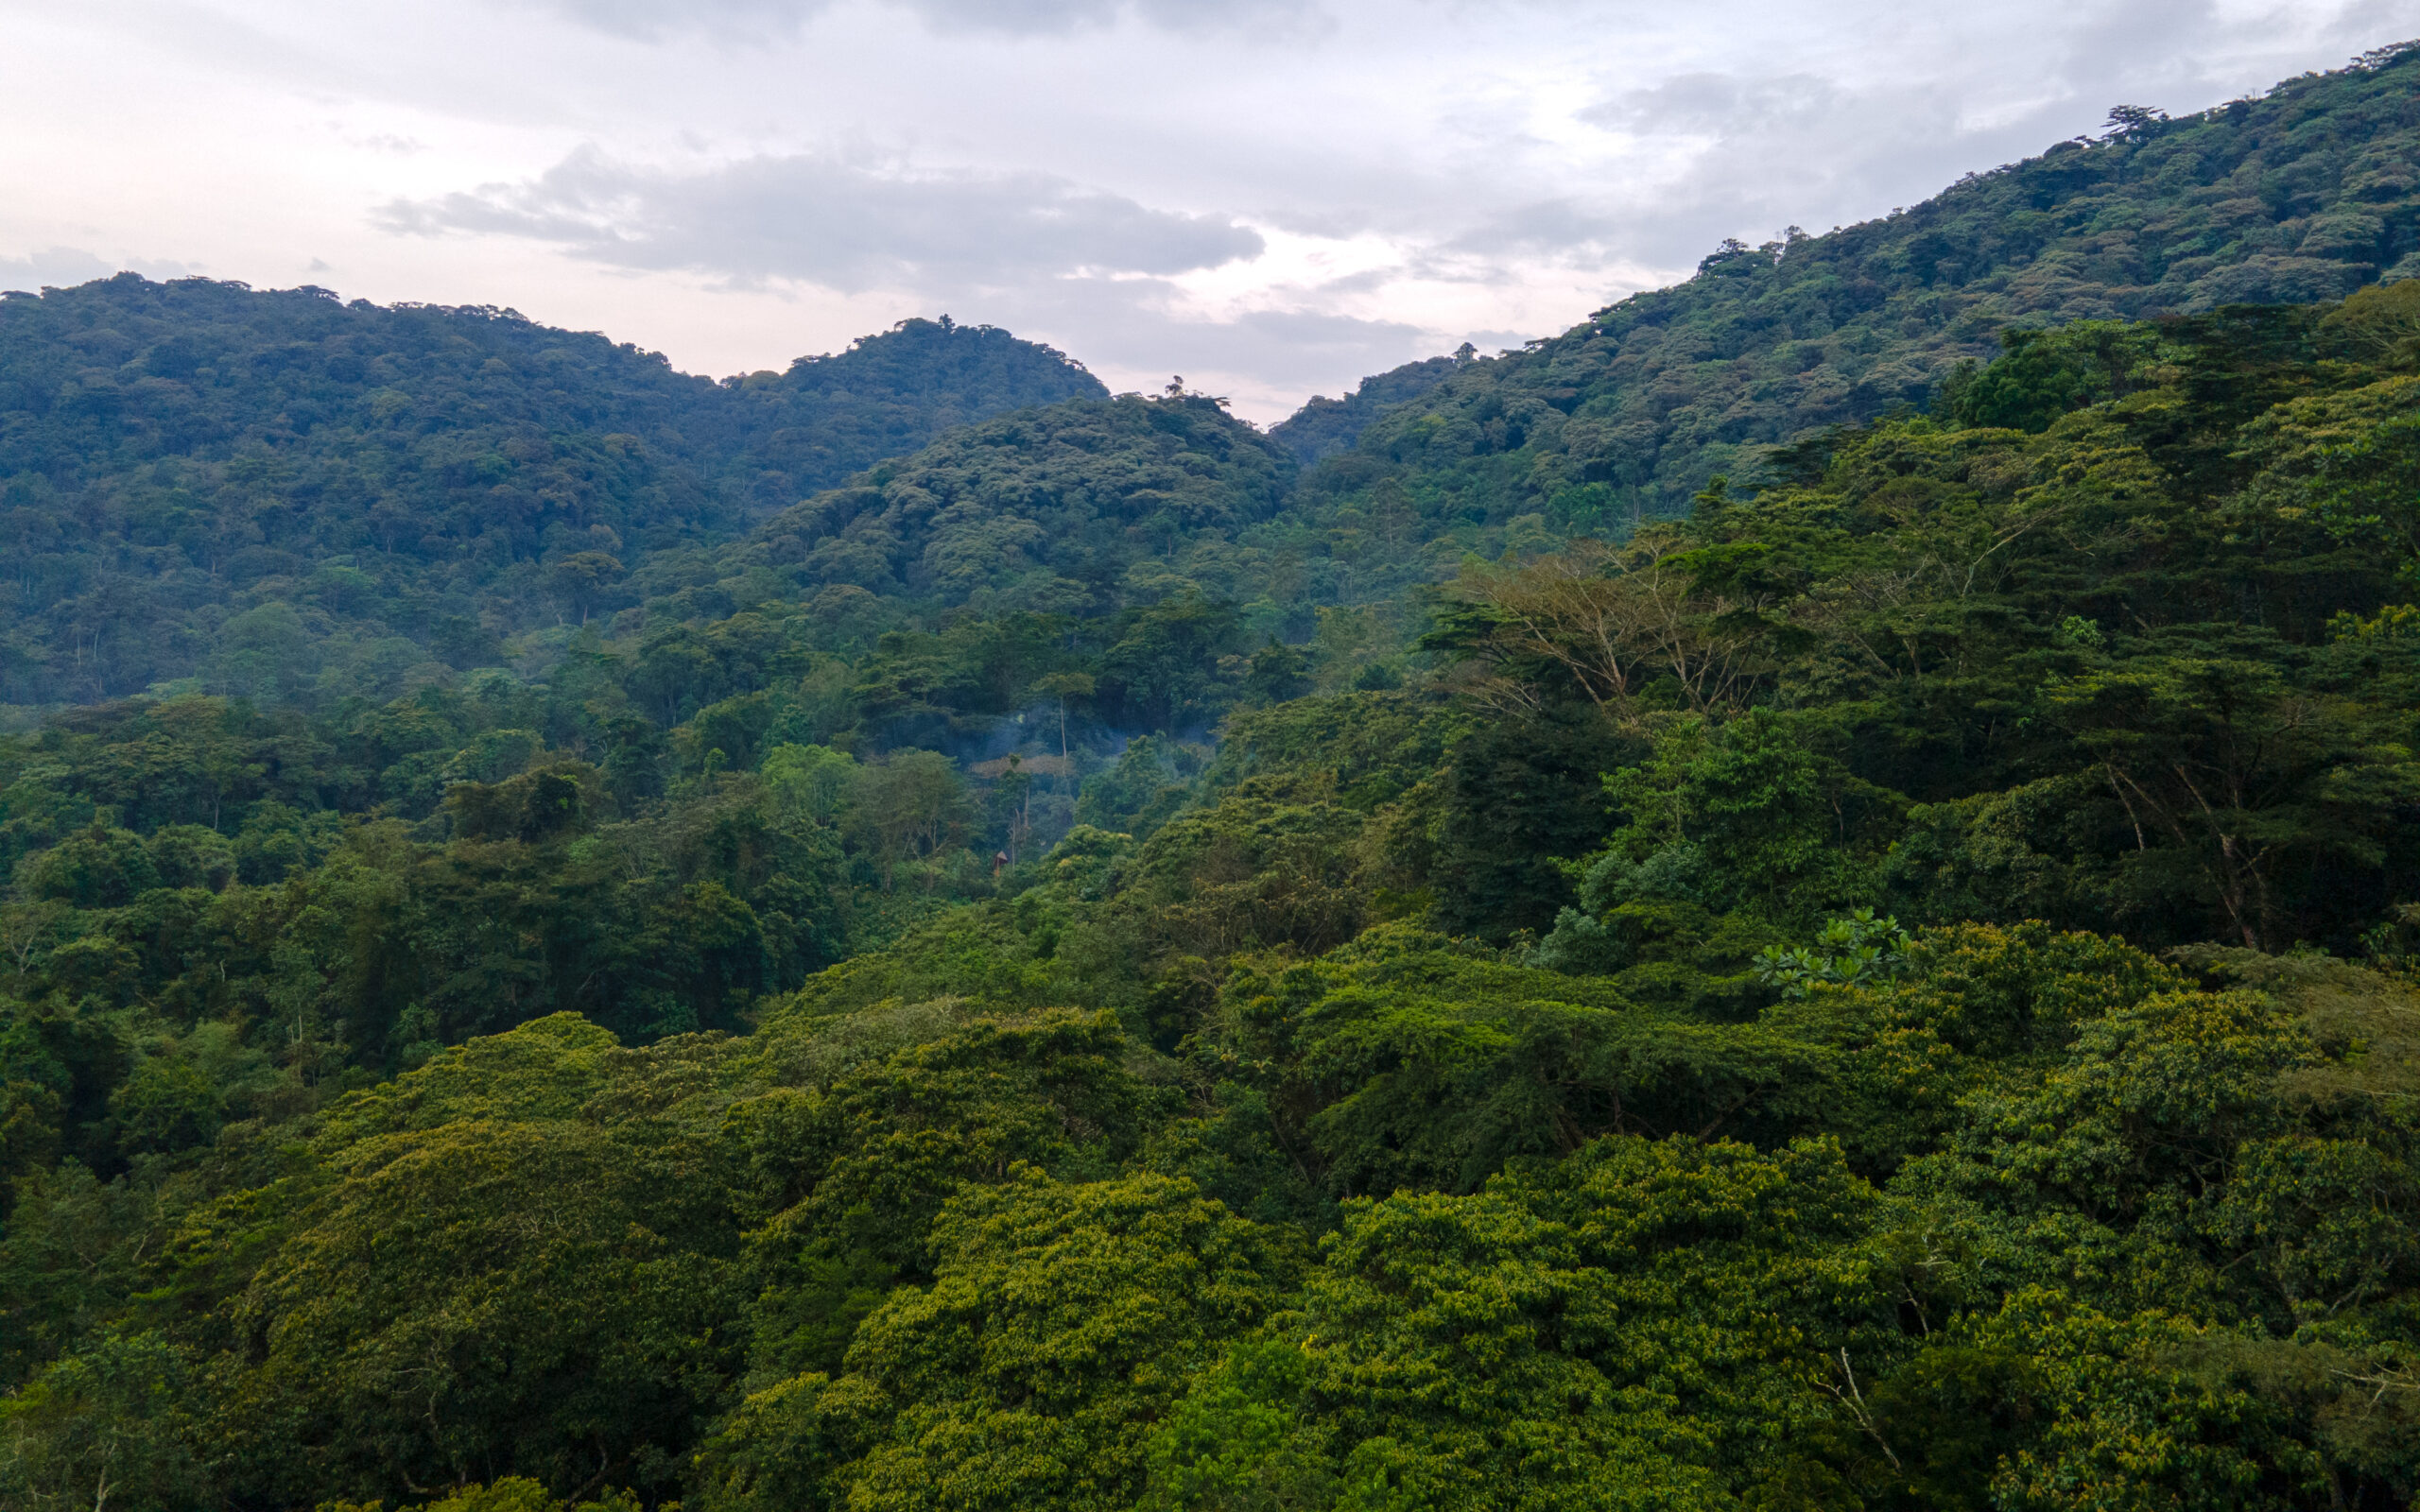 A photograph of the forest view of Bwindi Impenetrable Forest captured in Bwindi Impenetrable National Park in South-Western Uganda.